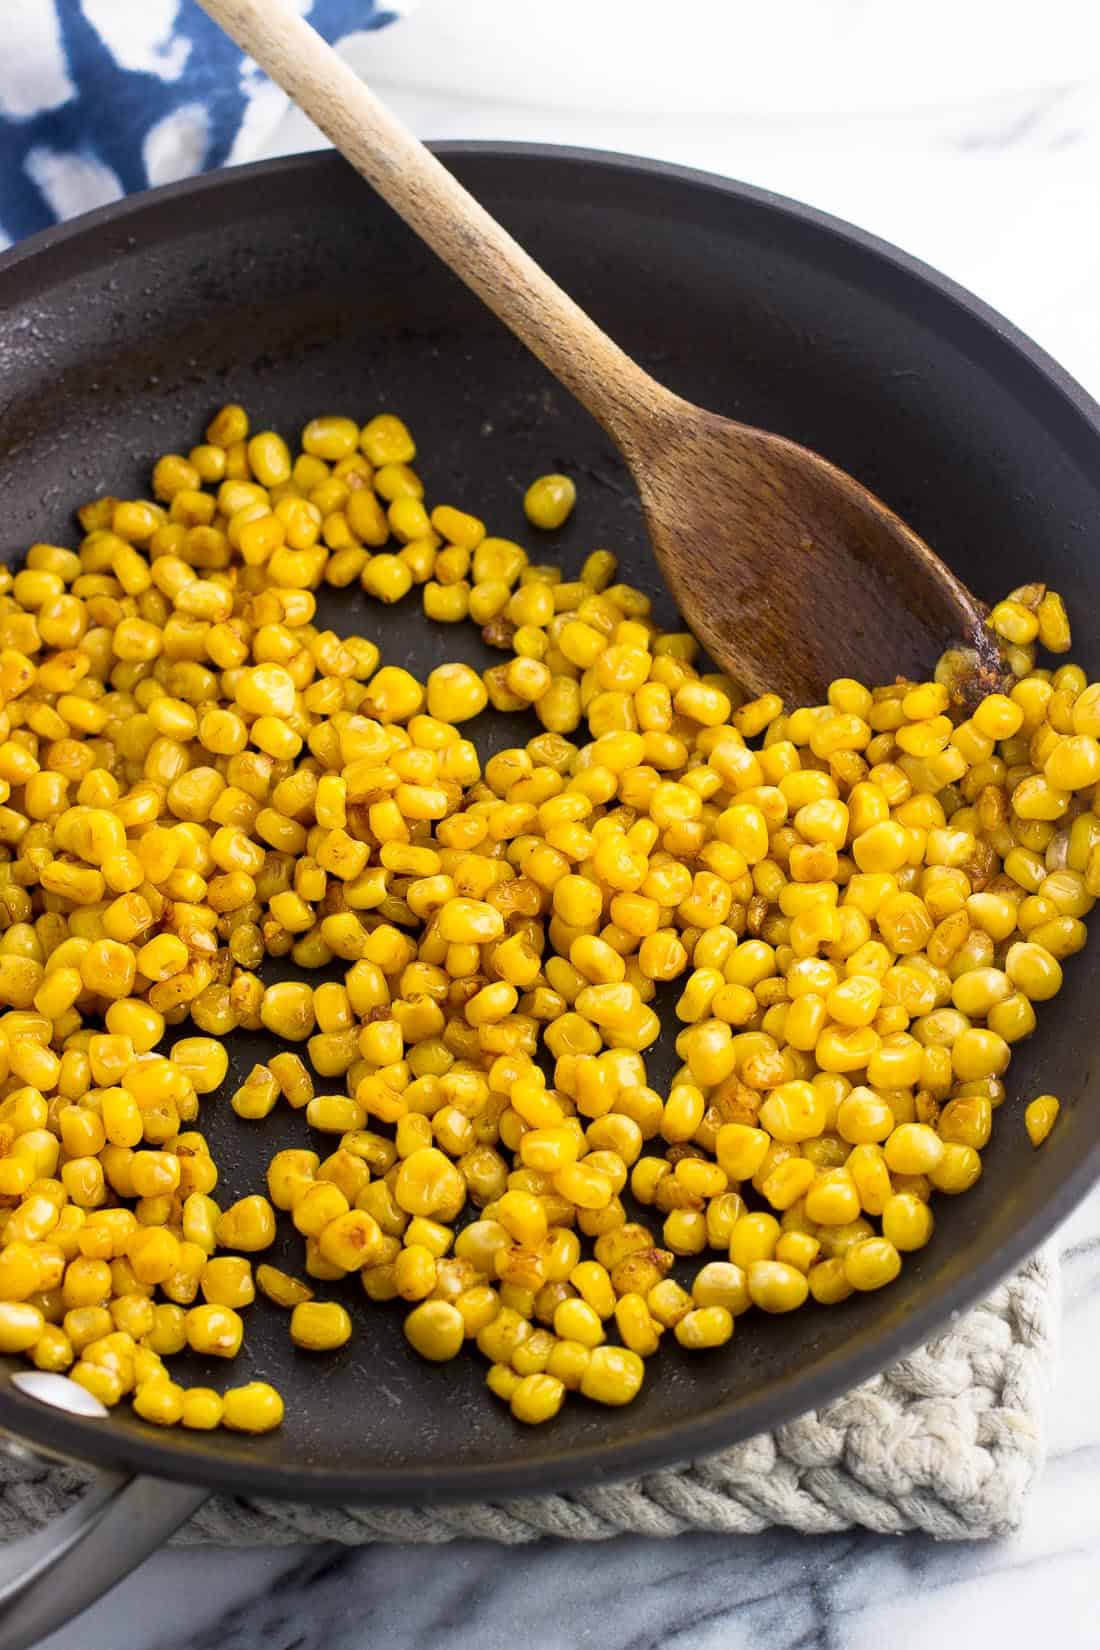 Roasted corn kernels in a skillet with a wooden spoon